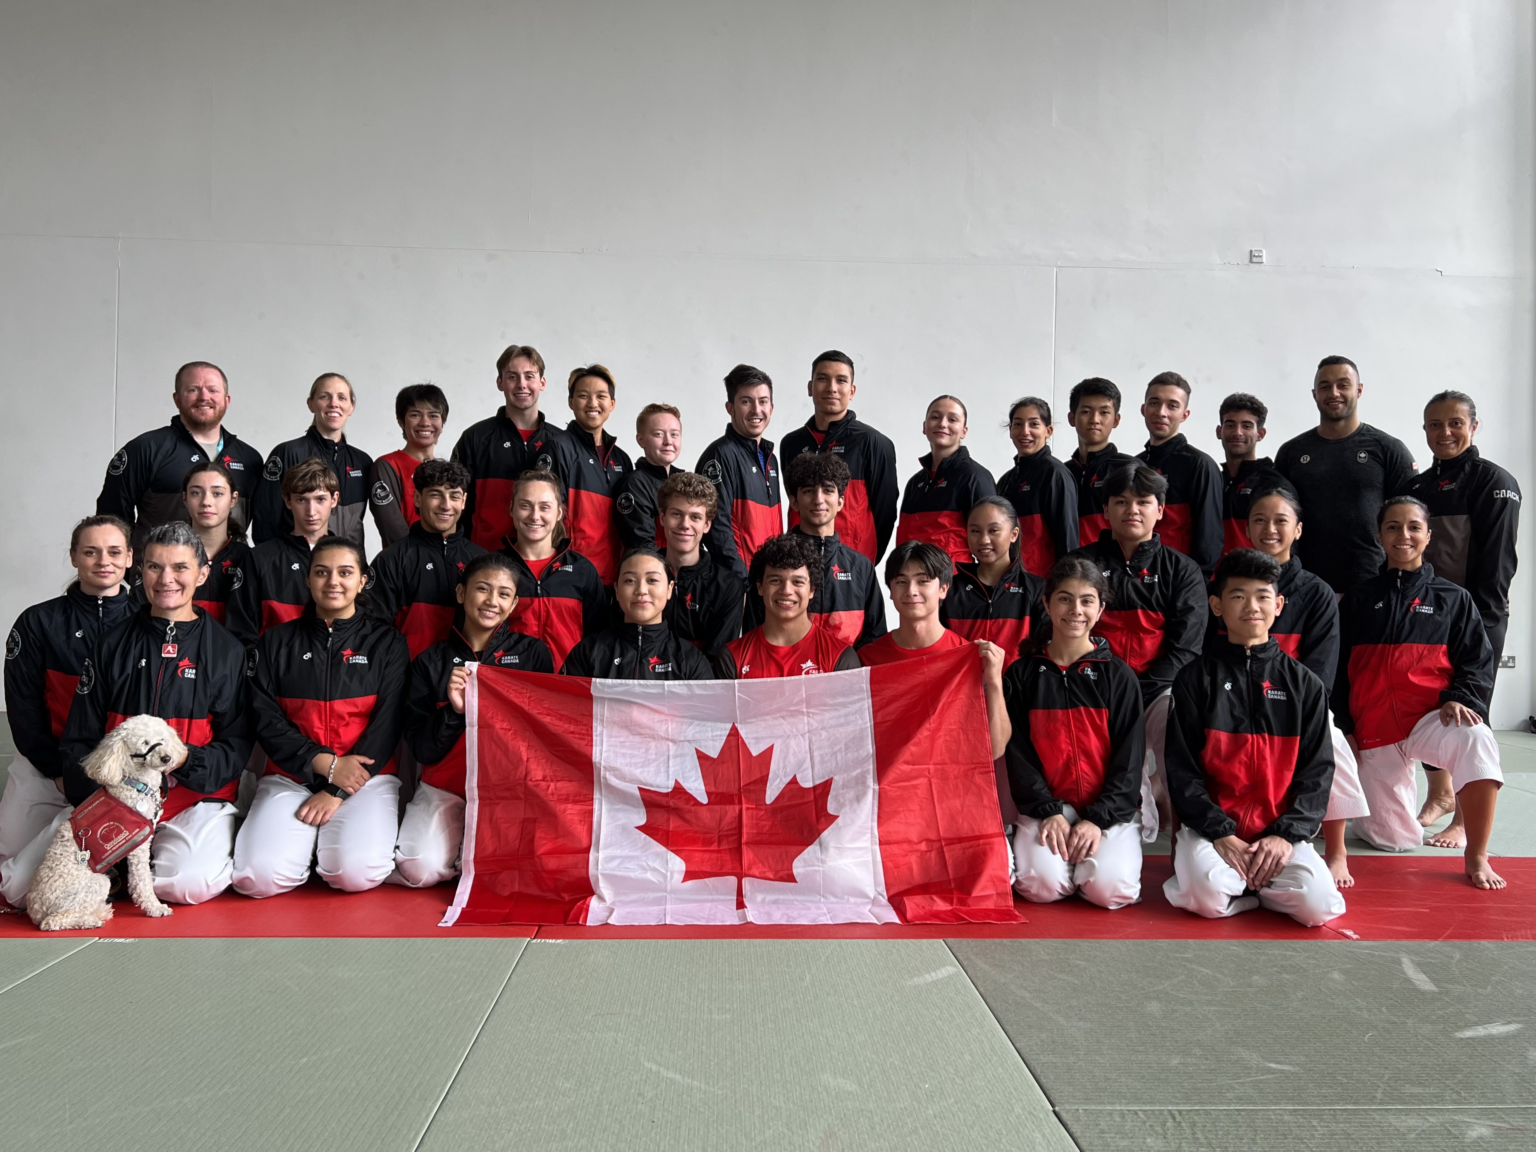 10TH COMMONWEALTH KARATE CHAMPIONSHIPS: A SUCCESS FOR CANADIANS